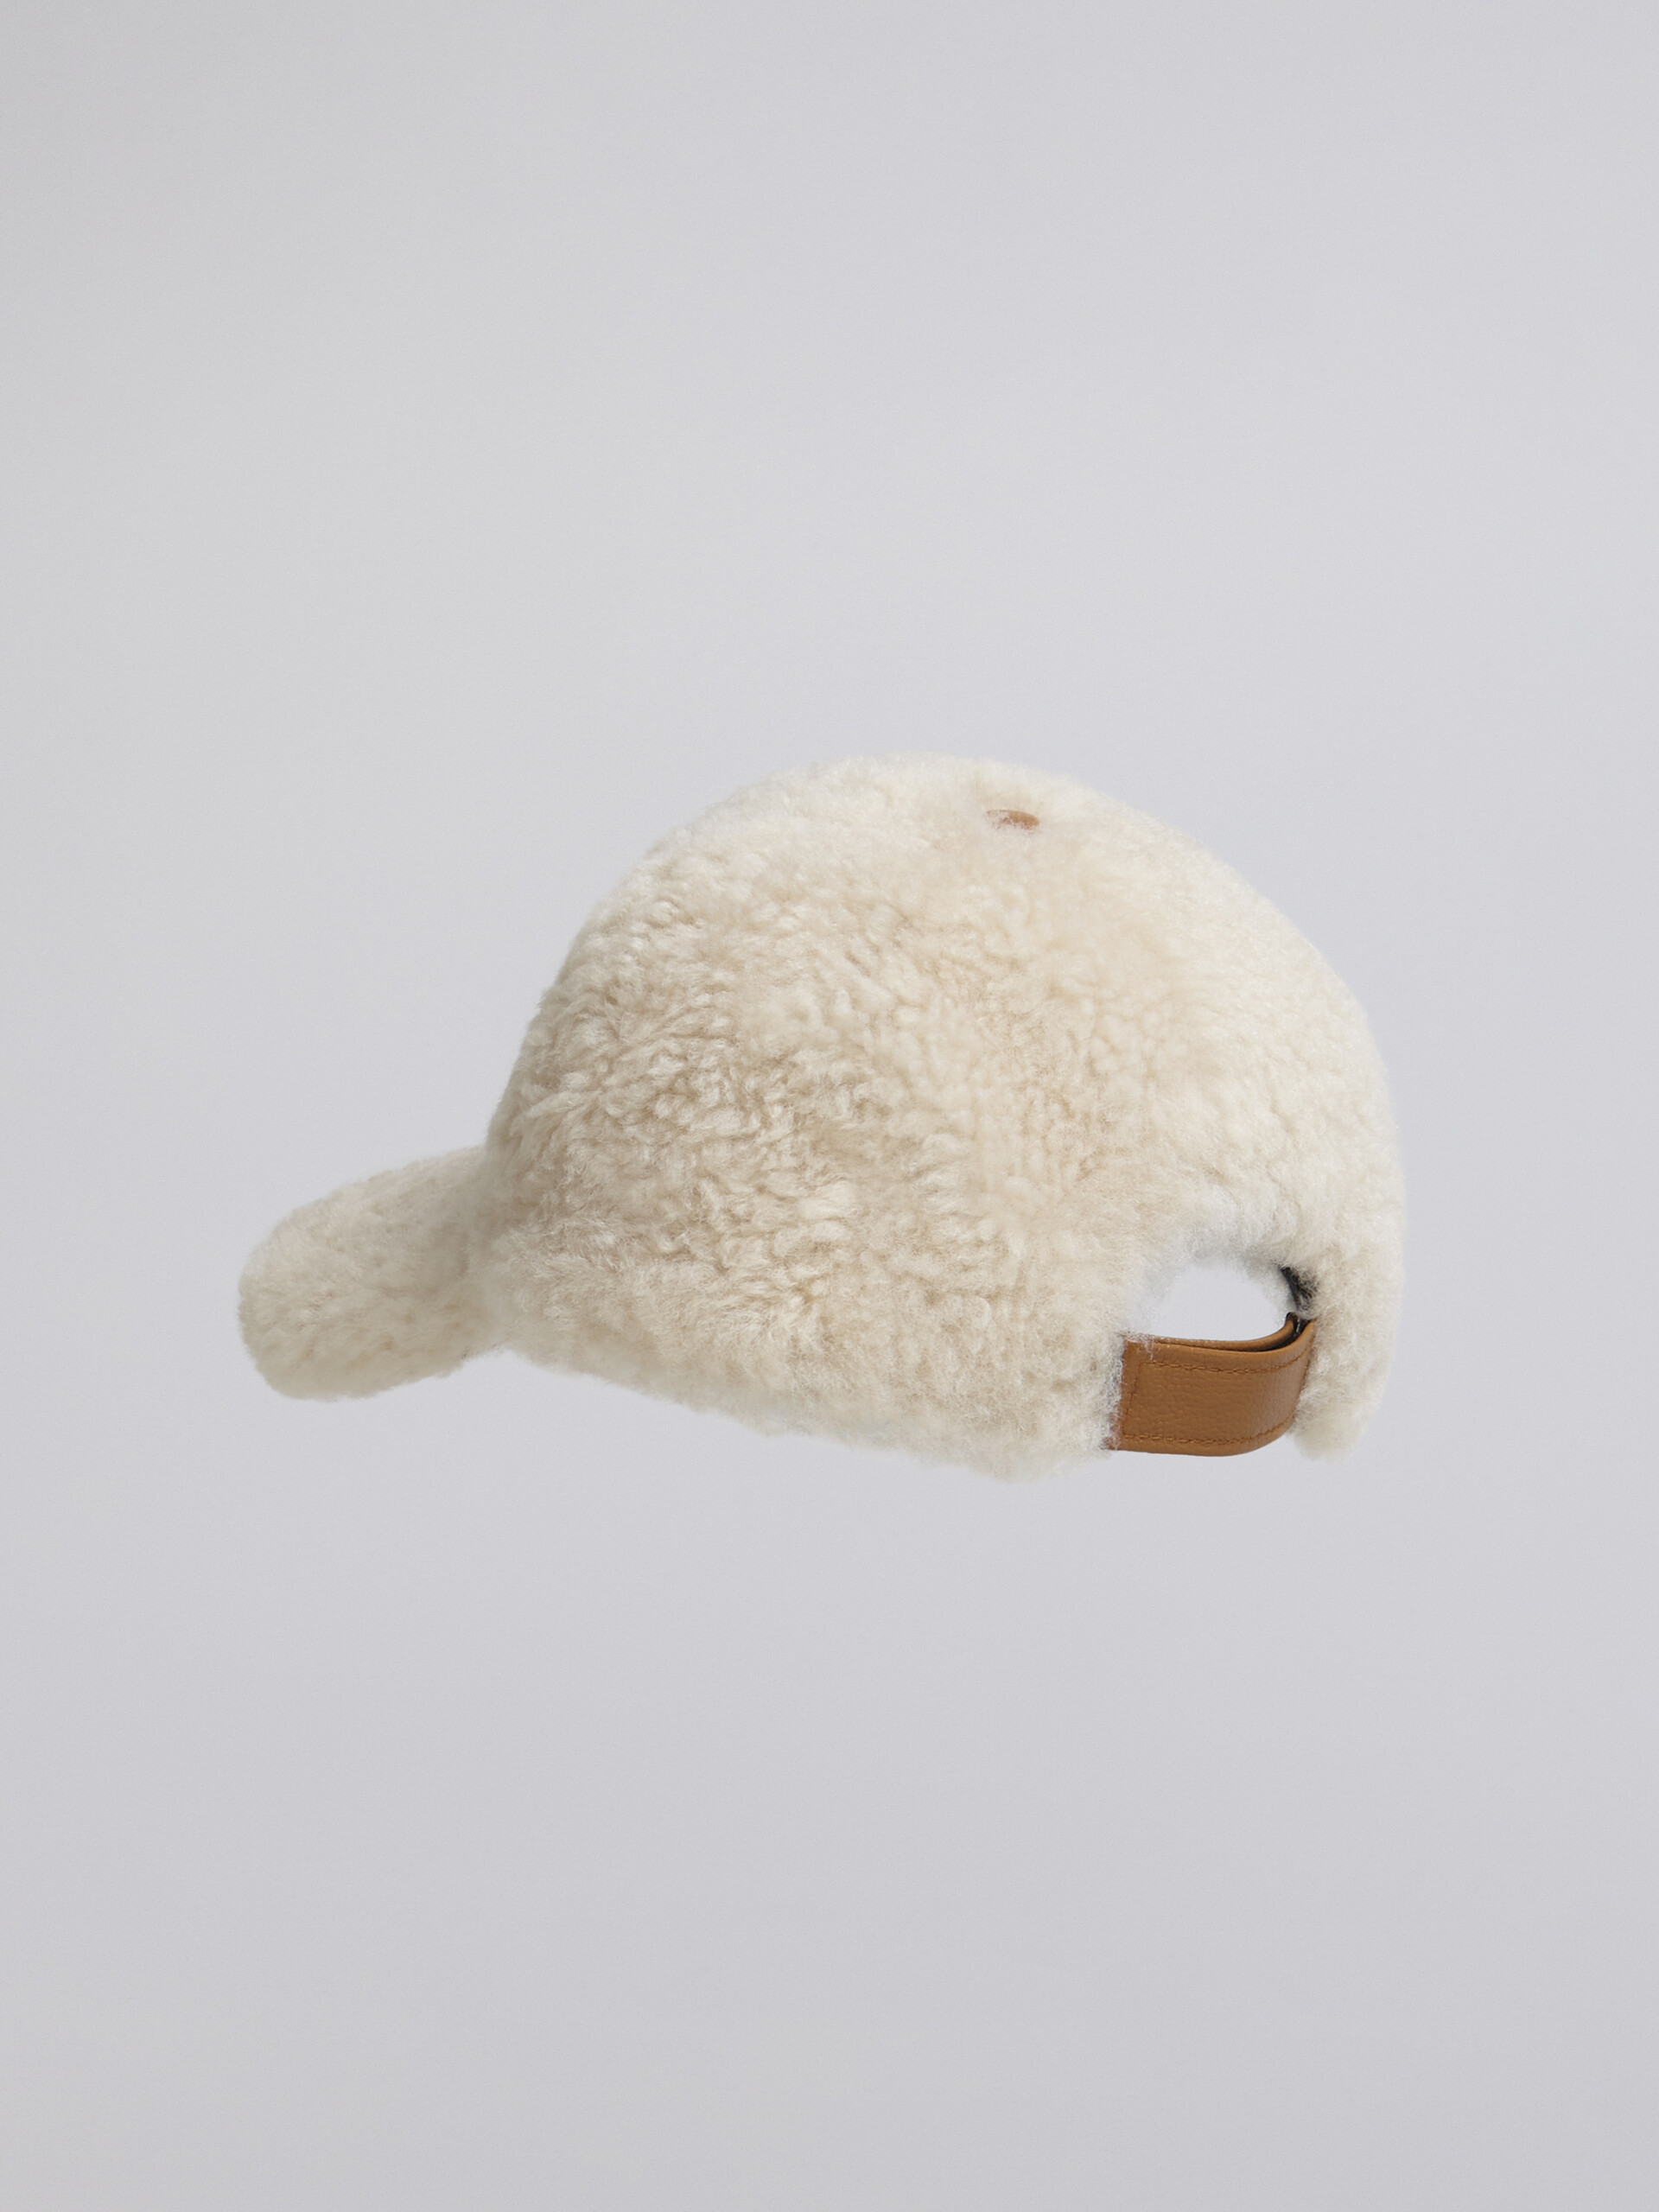 Shearling beanie with contrasting embroidered Marni logo - Hats - Image 2